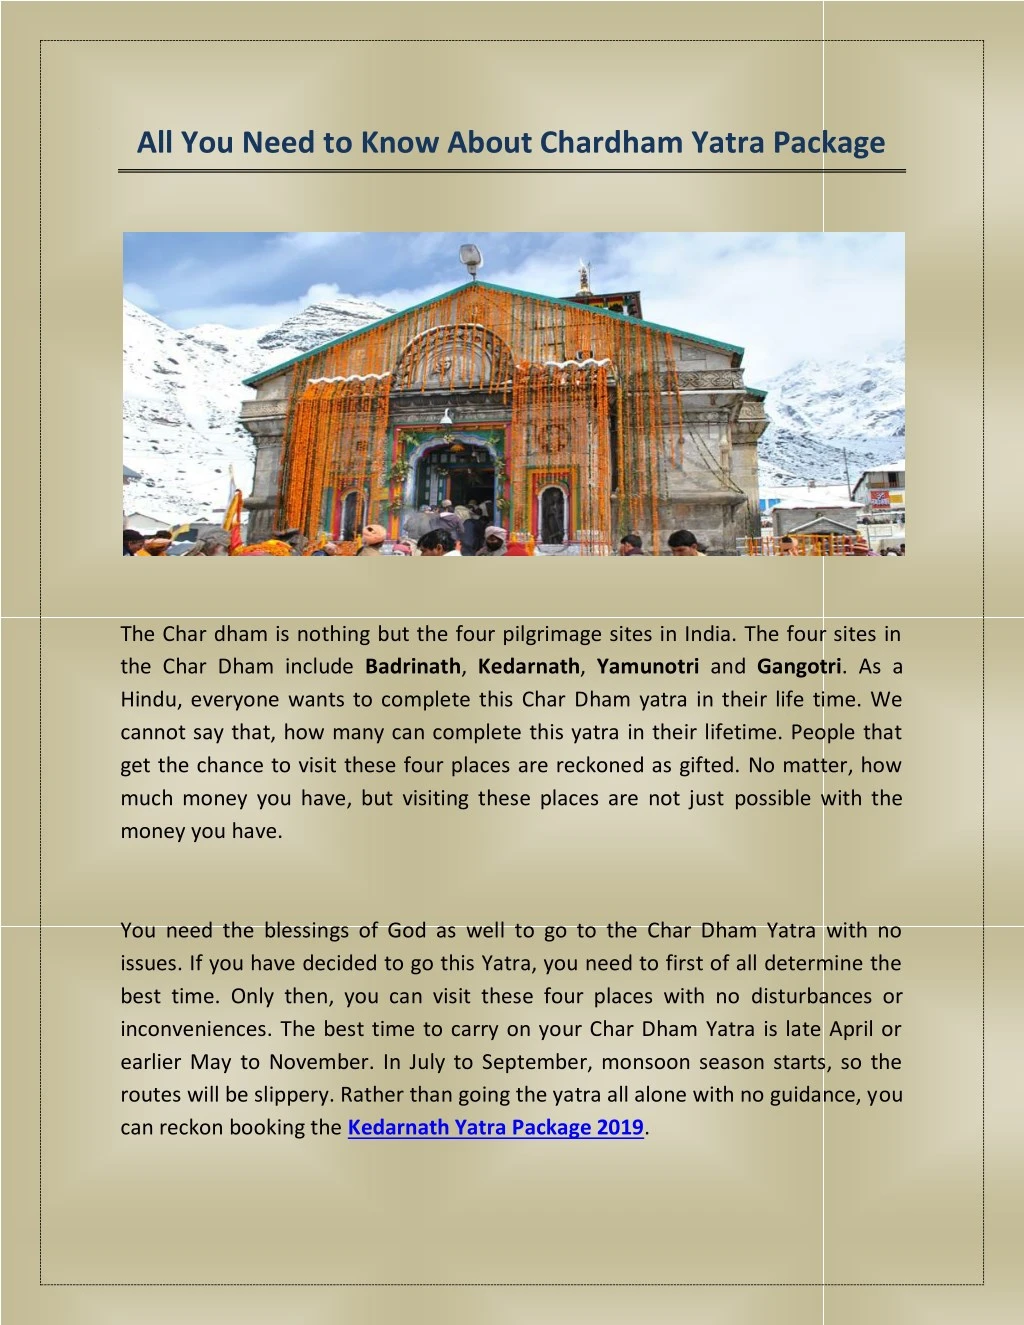 all you need to know about chardham yatra package